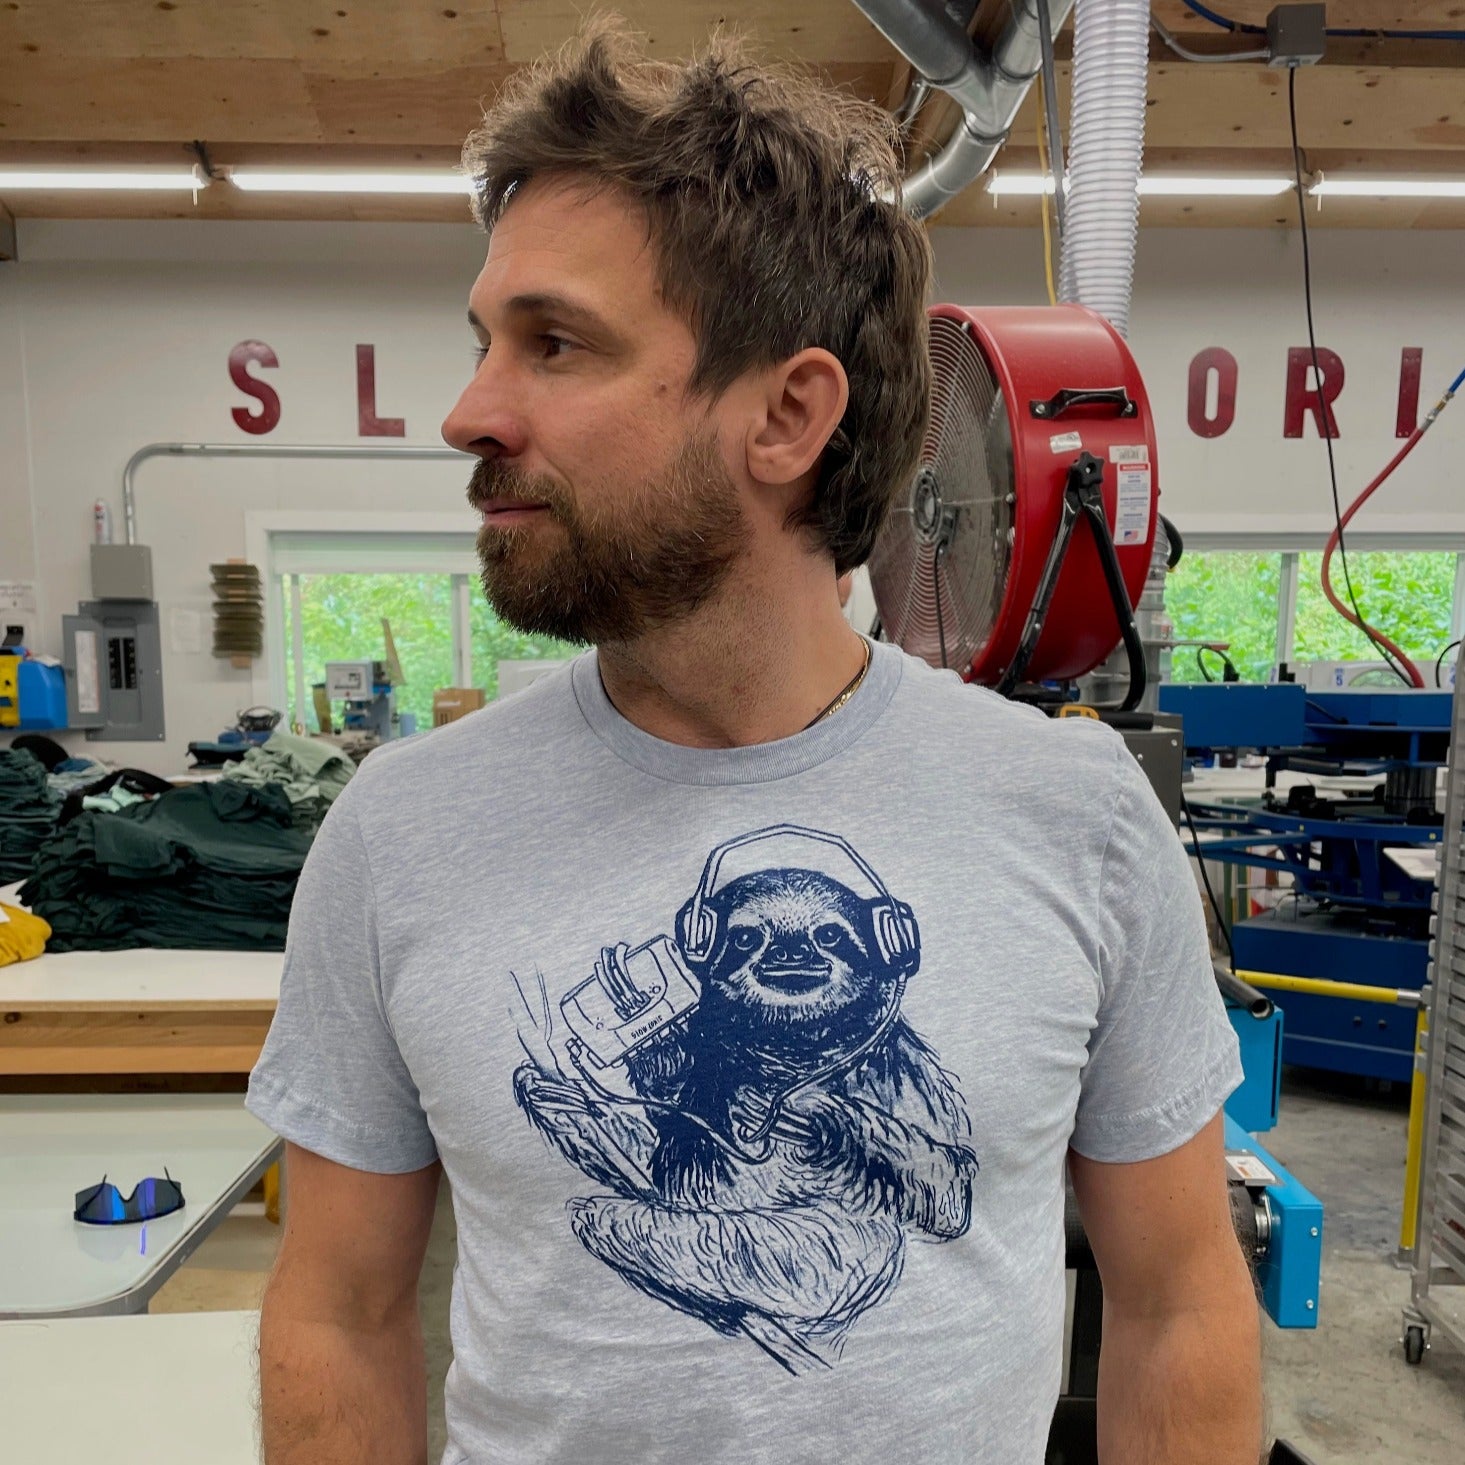 light blue shirt with dark blue screen print of a sloth listening to music on headphones.